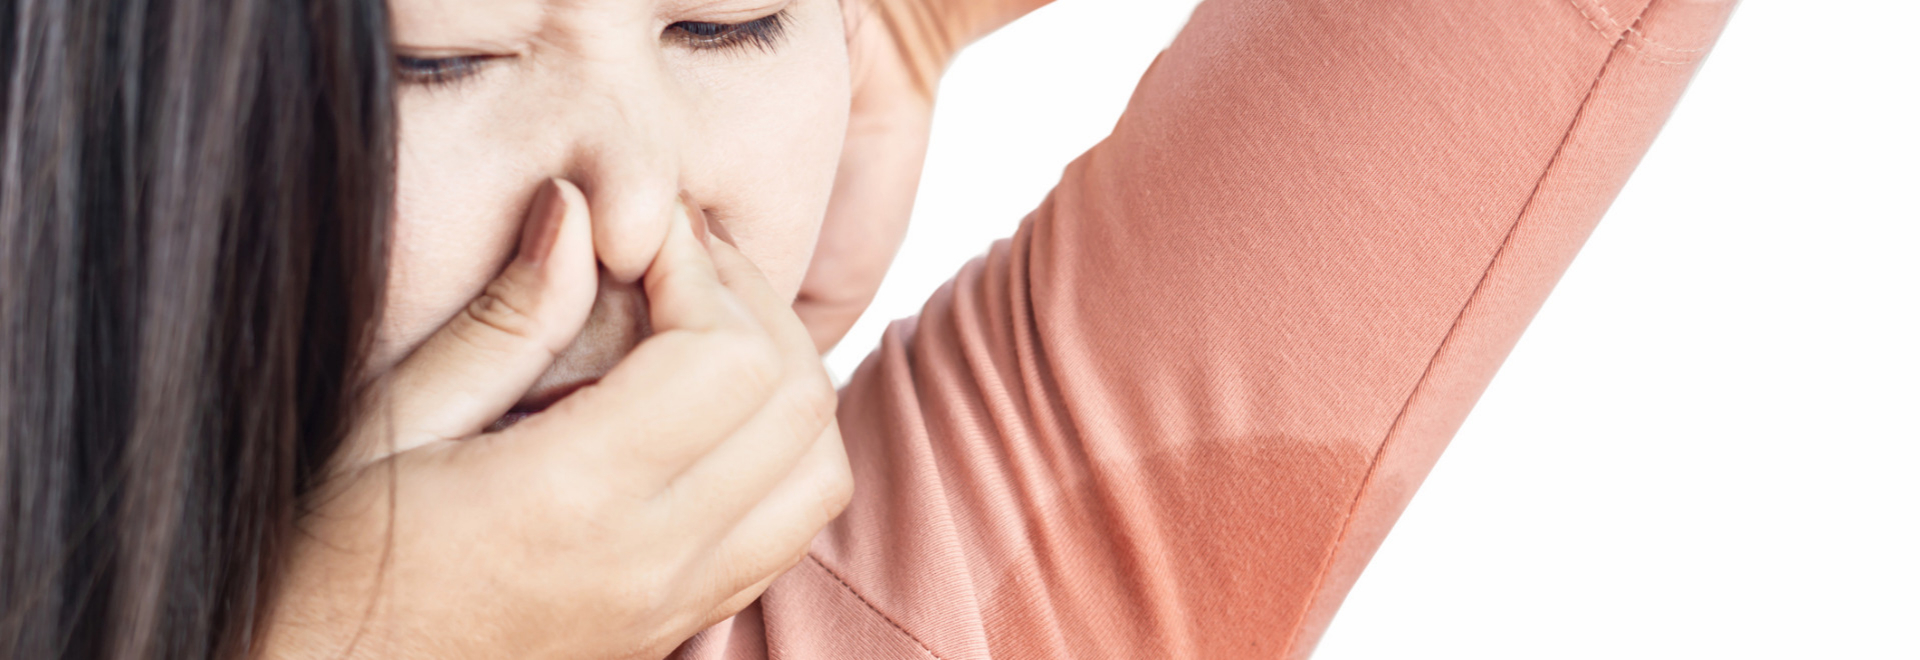 how-to-get-rid-of-body-odor